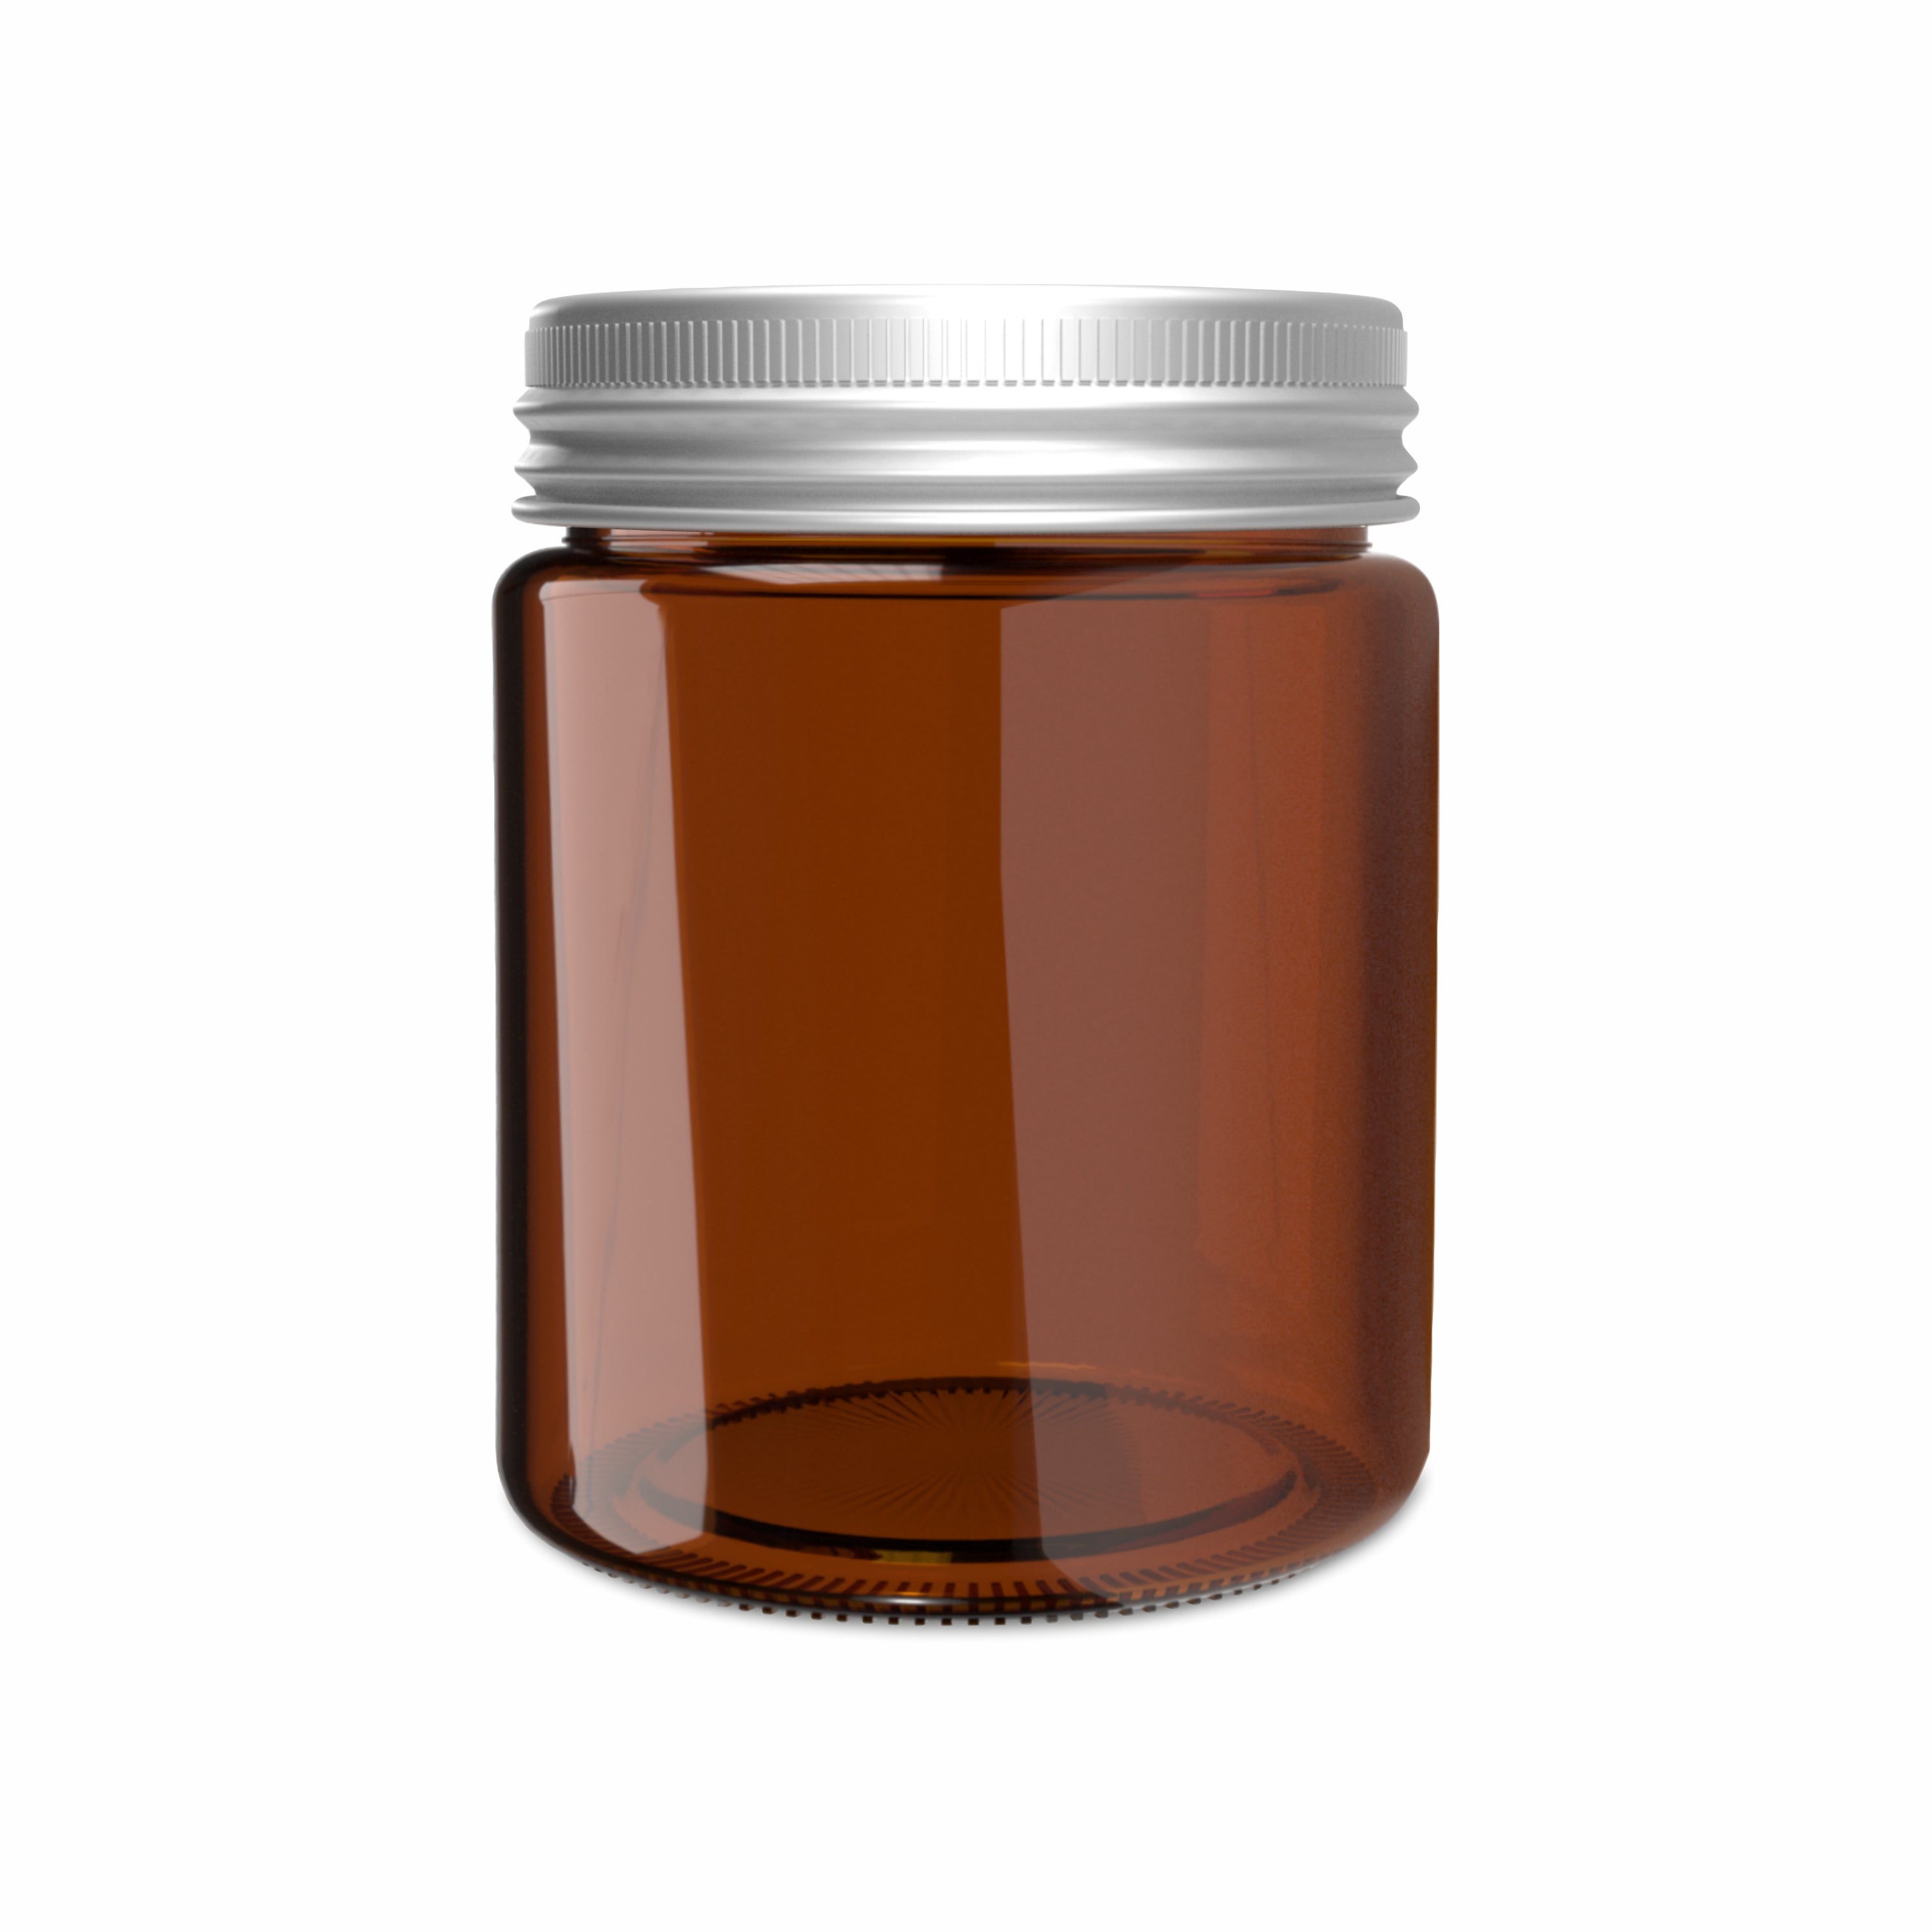 Amber Color Transparent glass Jar with silver Color Tin airtight lid || 100gm ||ZMJ43||